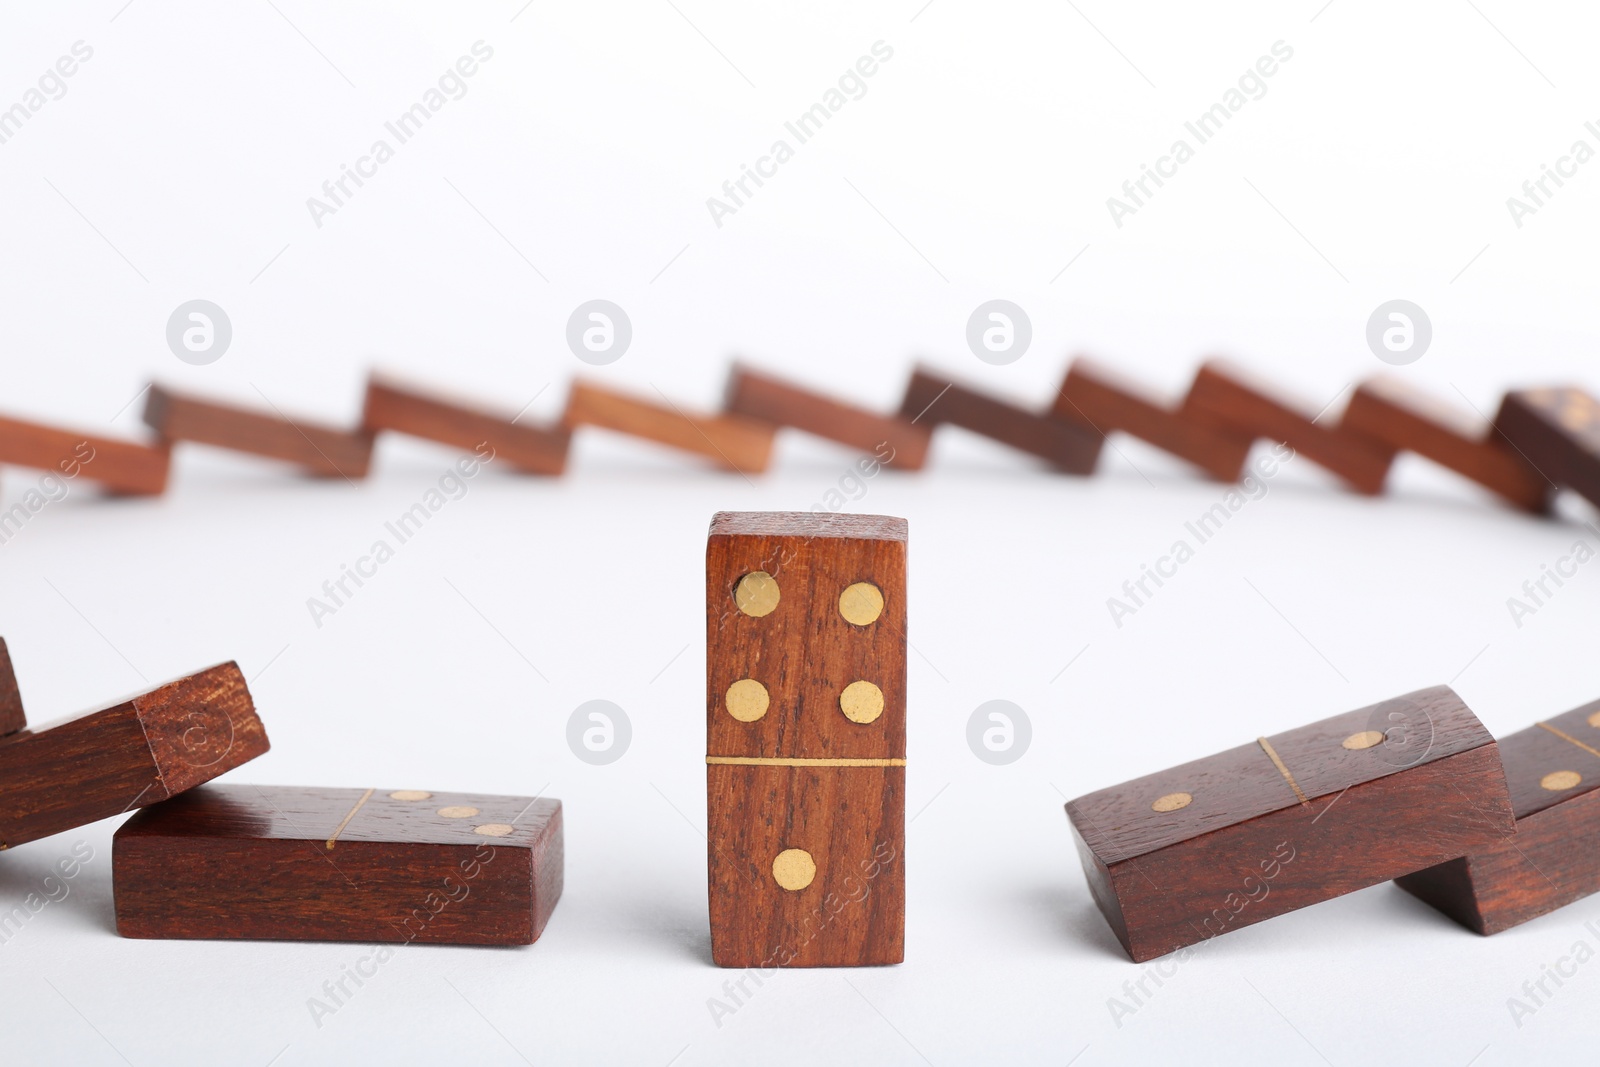 Photo of Standing domino piece among fallen ones on white background